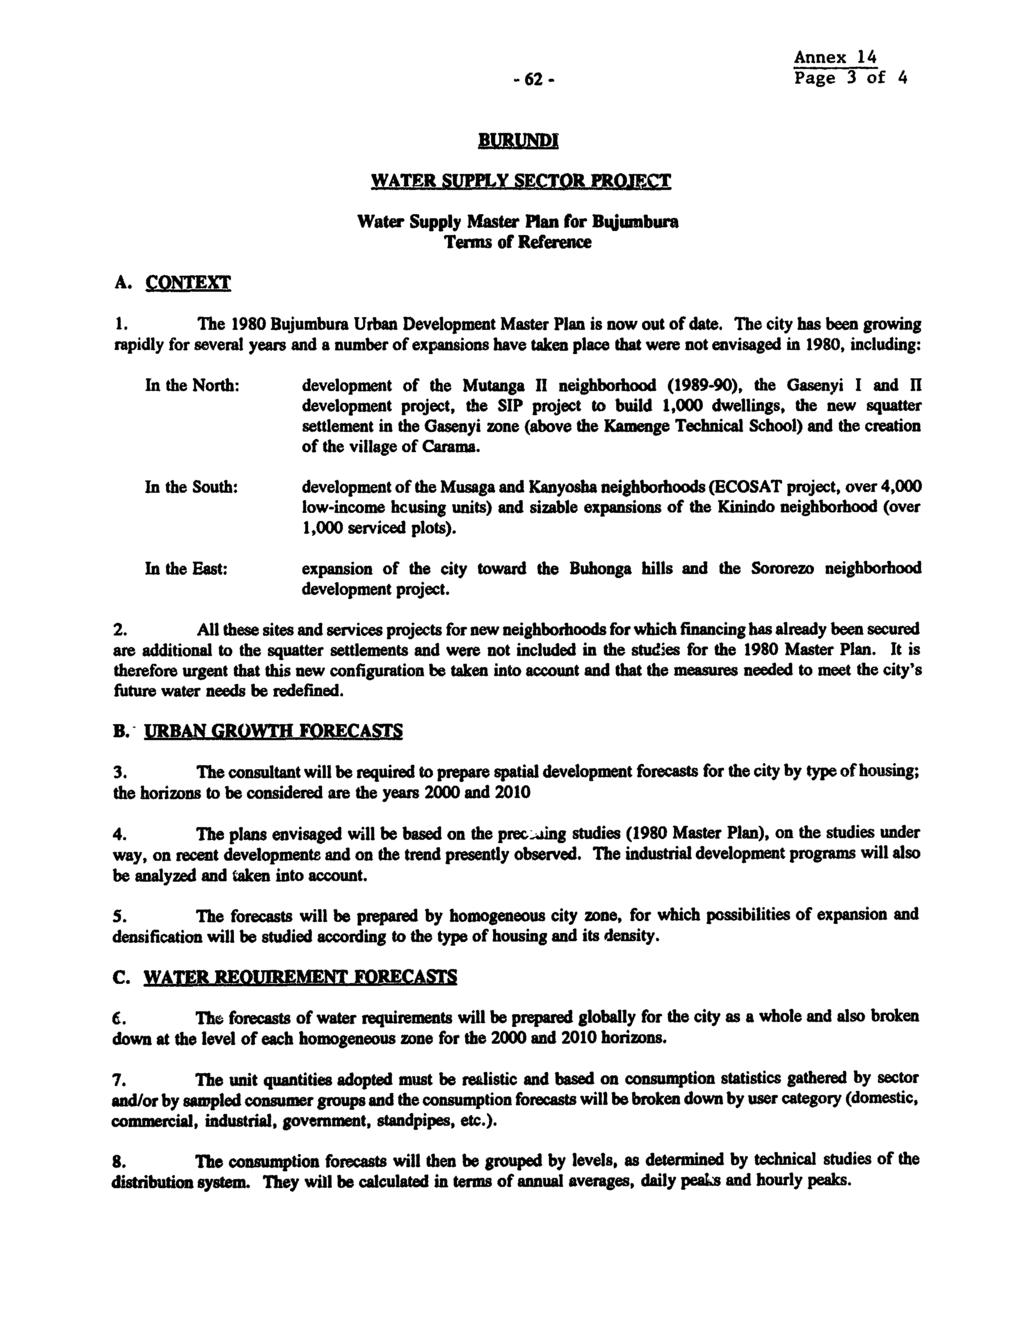 Annex 14-62- Page 3 of 4 WATER SUPPLY SECTQR PROJECT Water Supply Master Plan for BDuumbura Tenms of Reference A. CONTEXT 1. The 198 Bujumbura Urban Development Master Plan is now out of date.